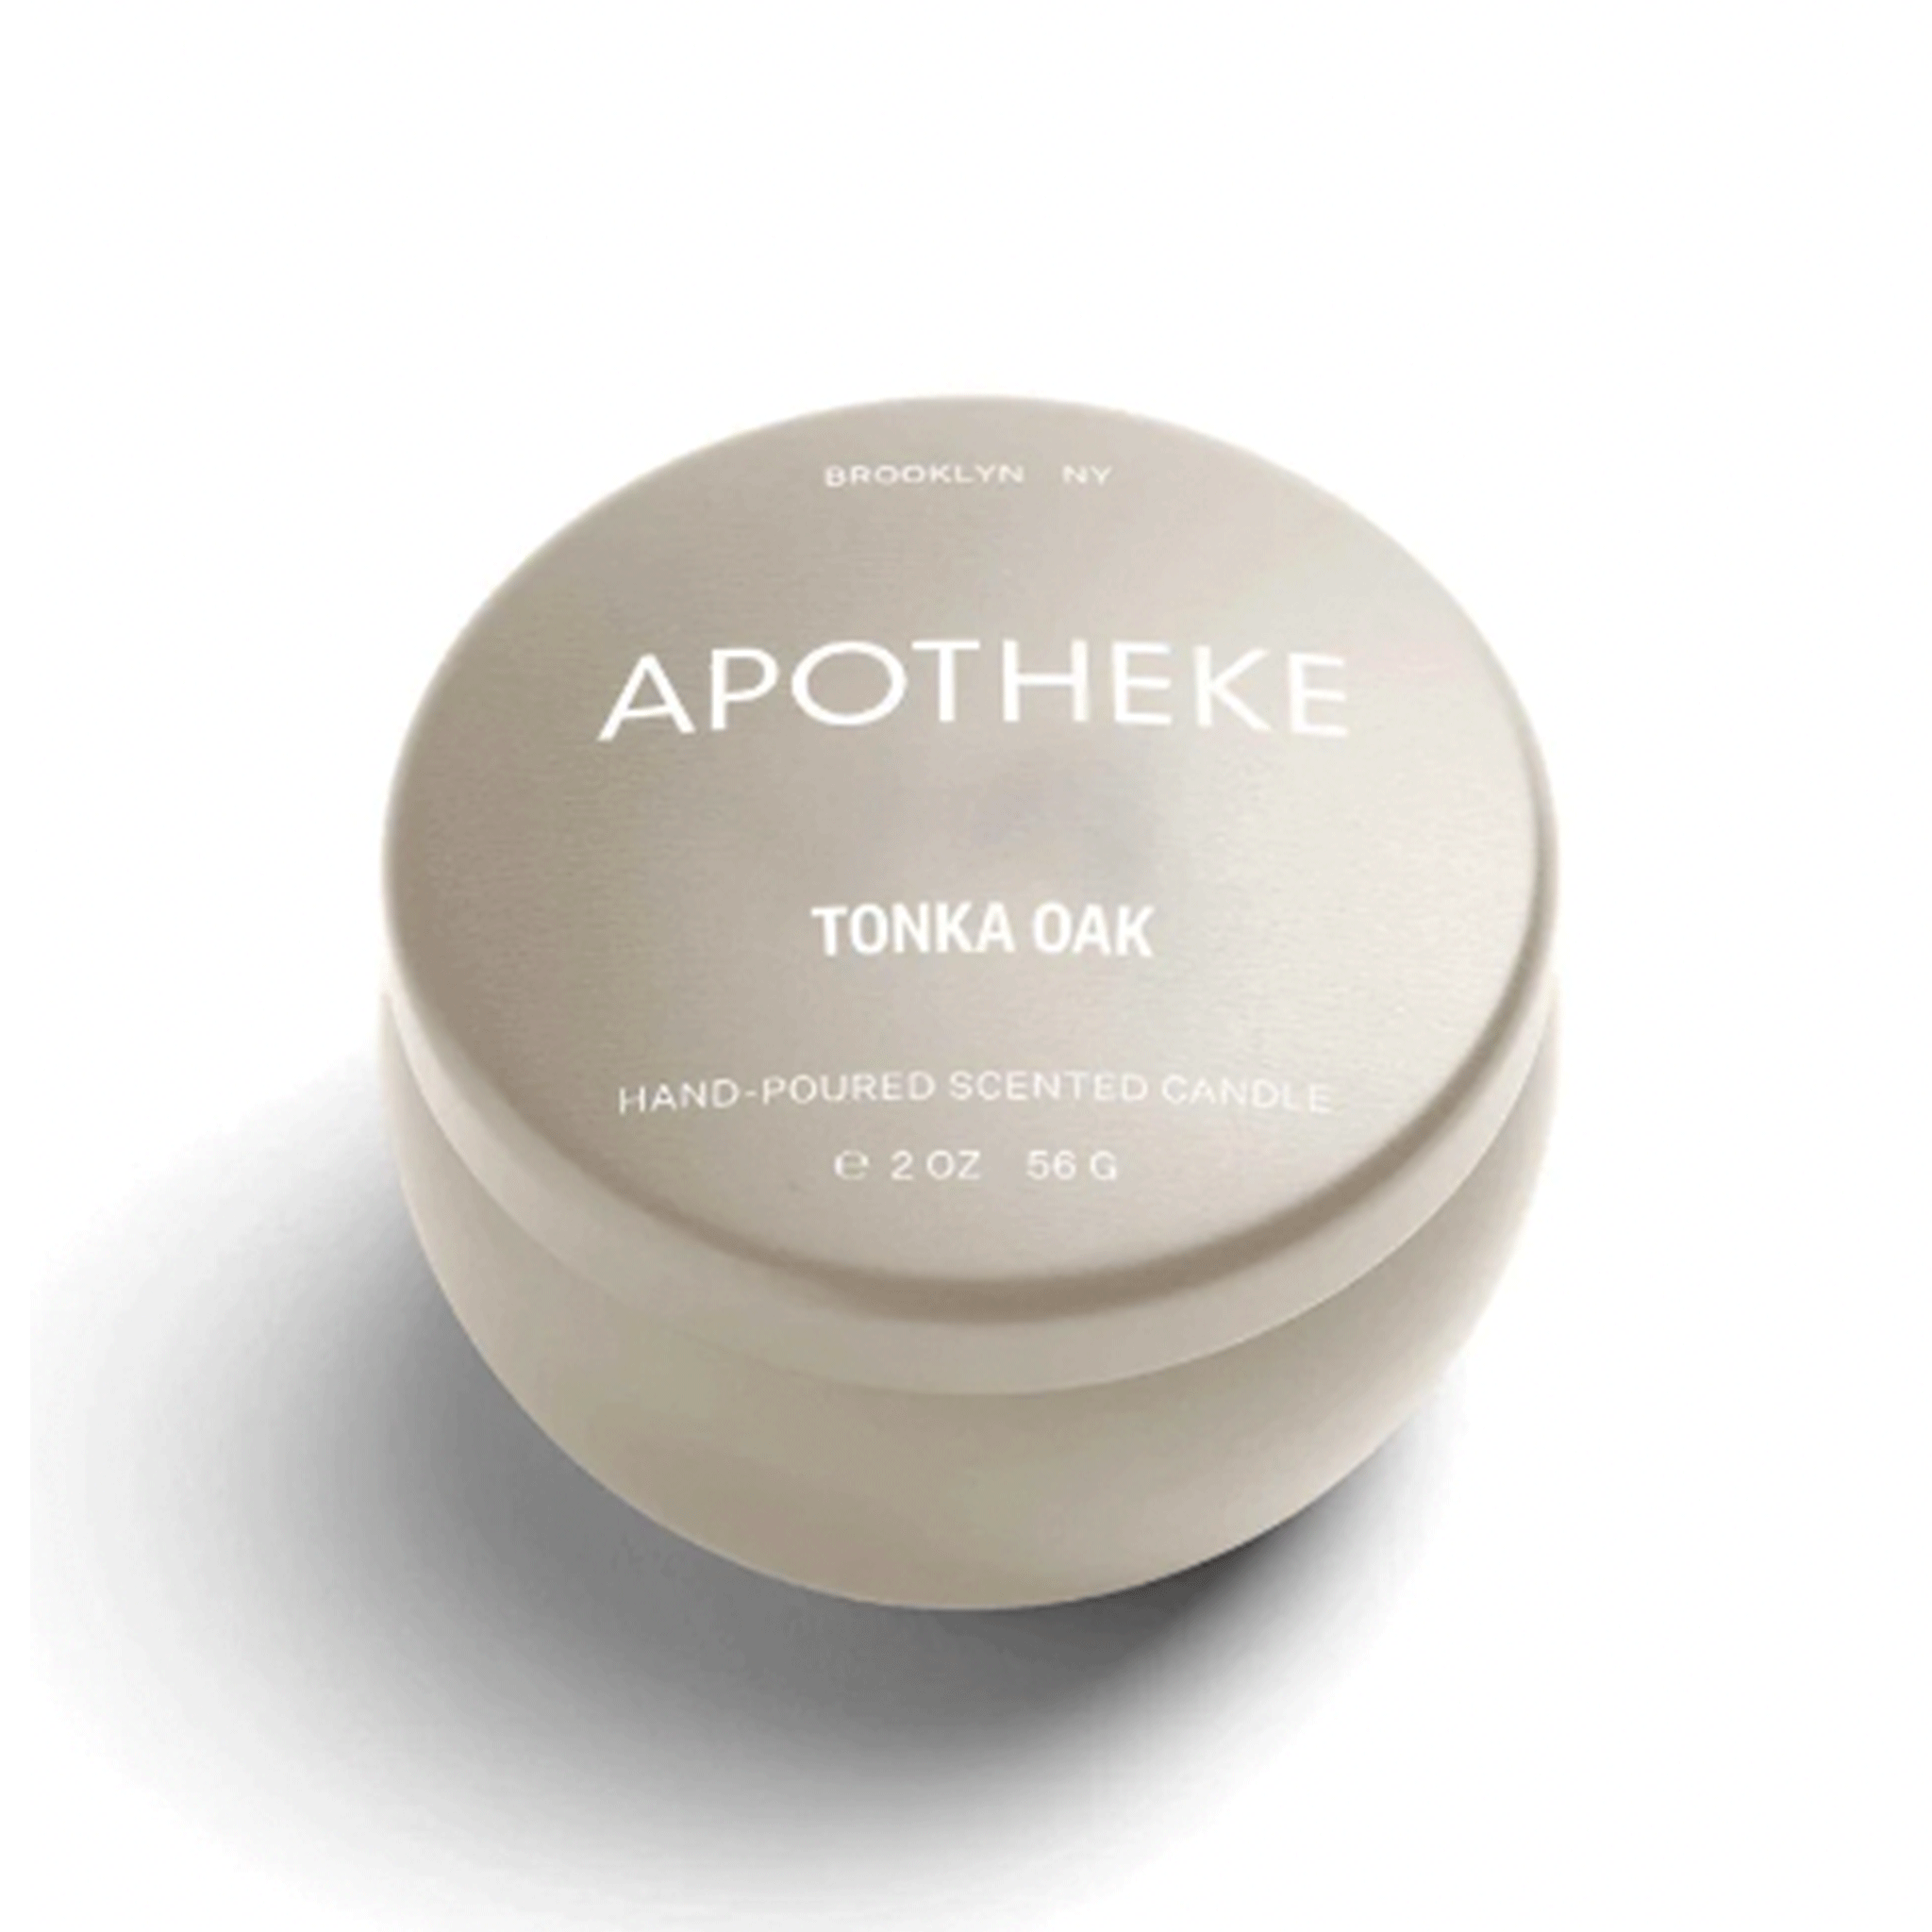 On a white background is a neutral mini tin candle with white text on the lid that reads, "Apotheke Tonka Oak Hand Poured Scented Candle". 